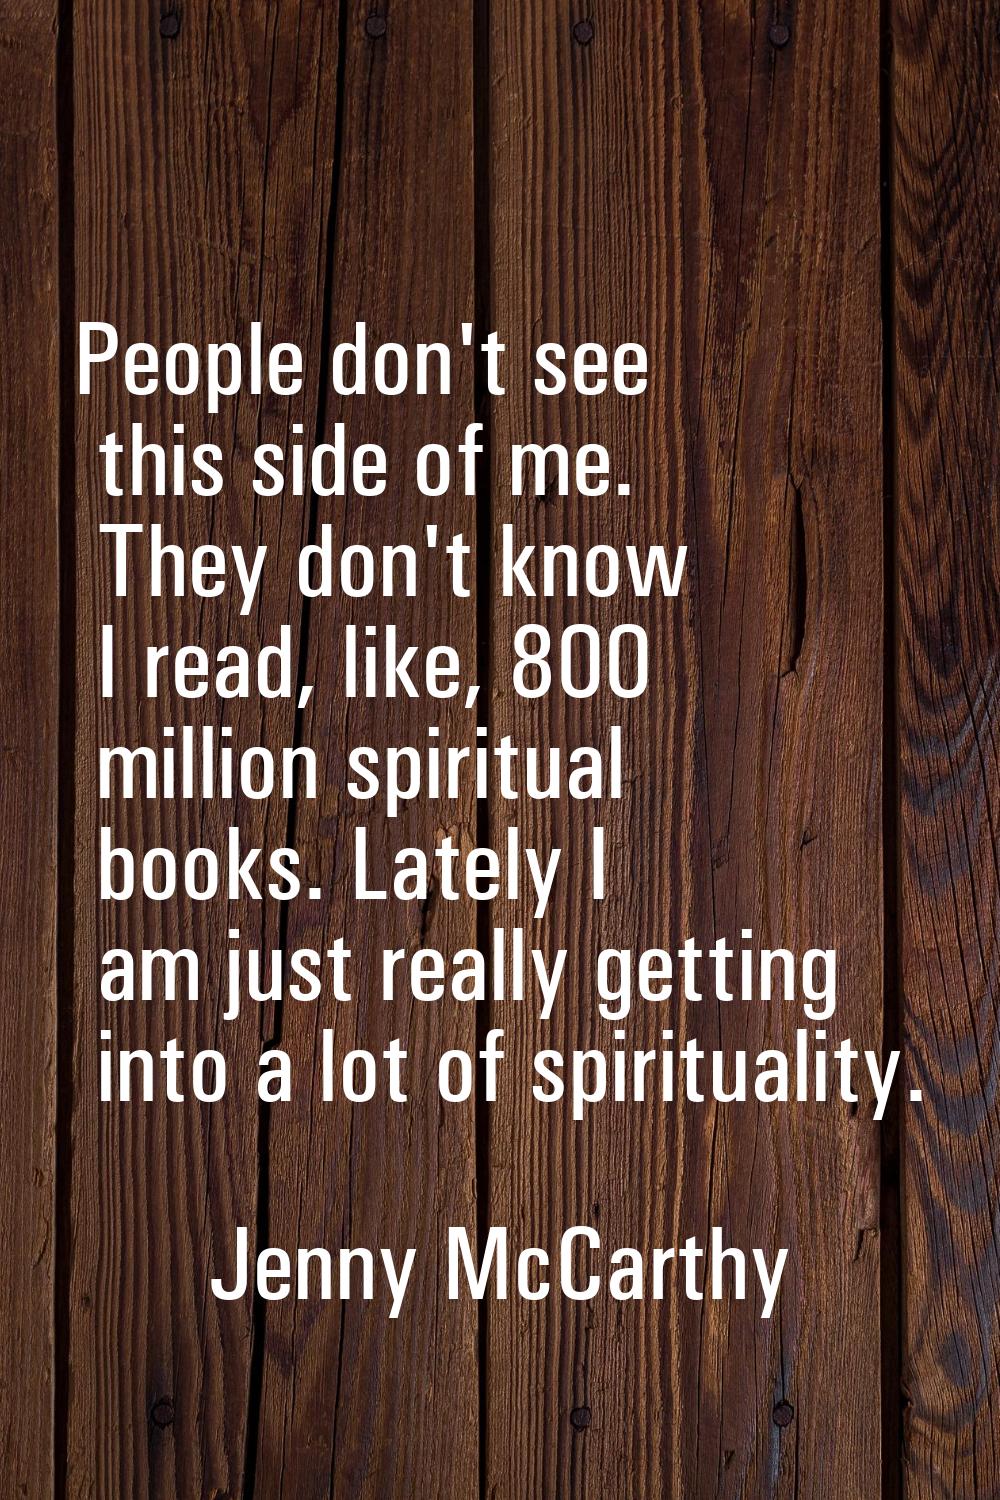 People don't see this side of me. They don't know I read, like, 800 million spiritual books. Lately